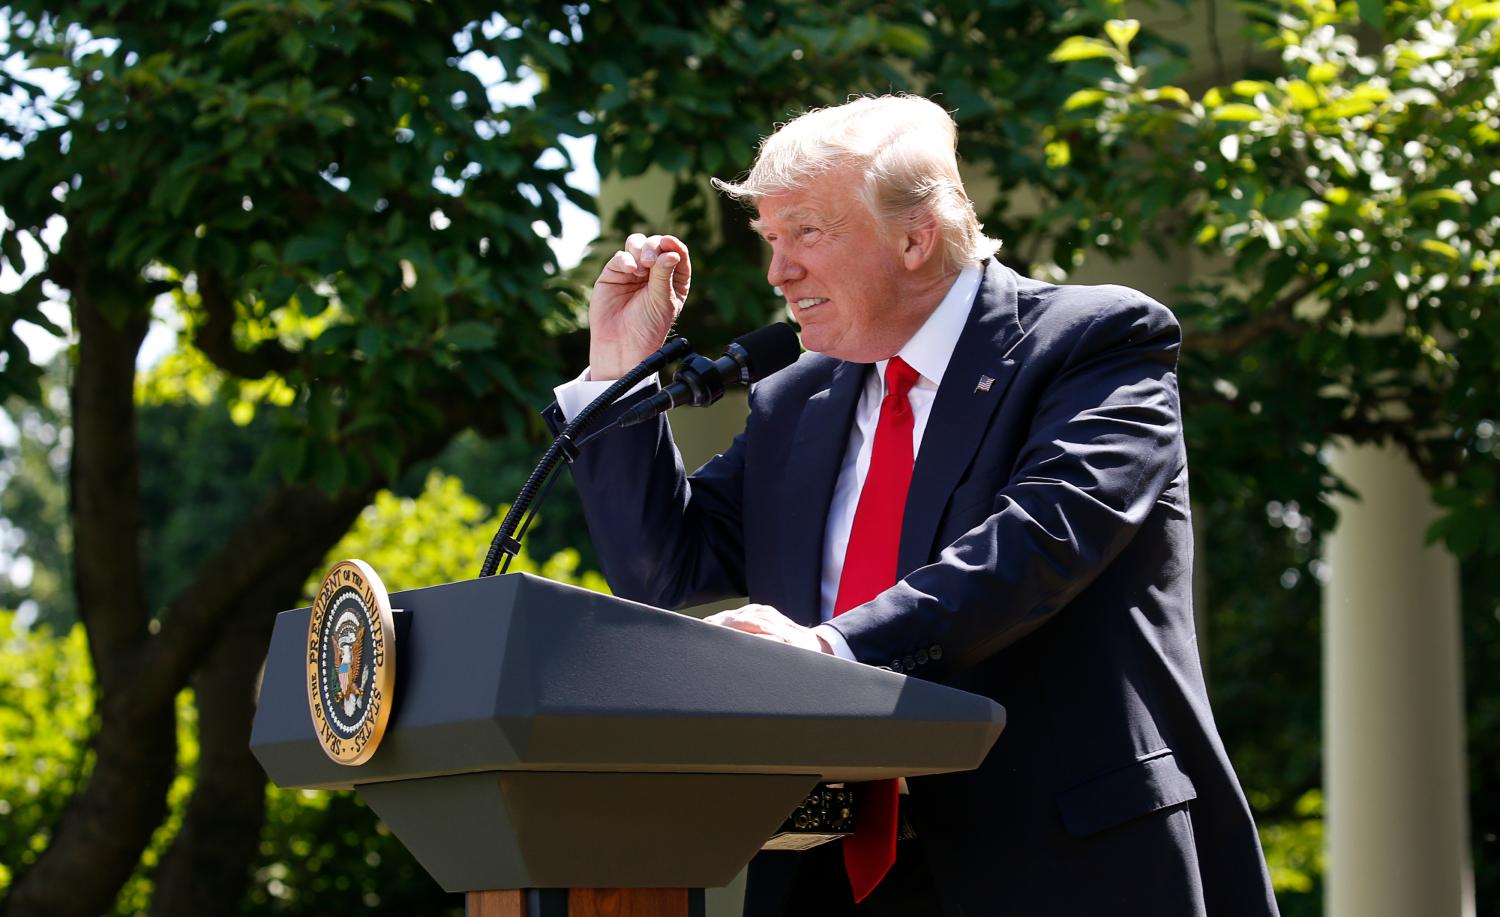 U.S. President Donald Trump refers to amounts of temperature change as he announces his decision that the United States will withdraw from the landmark Paris Climate Agreement, in the Rose Garden of the White House in Washington, U.S., June 1, 2017.